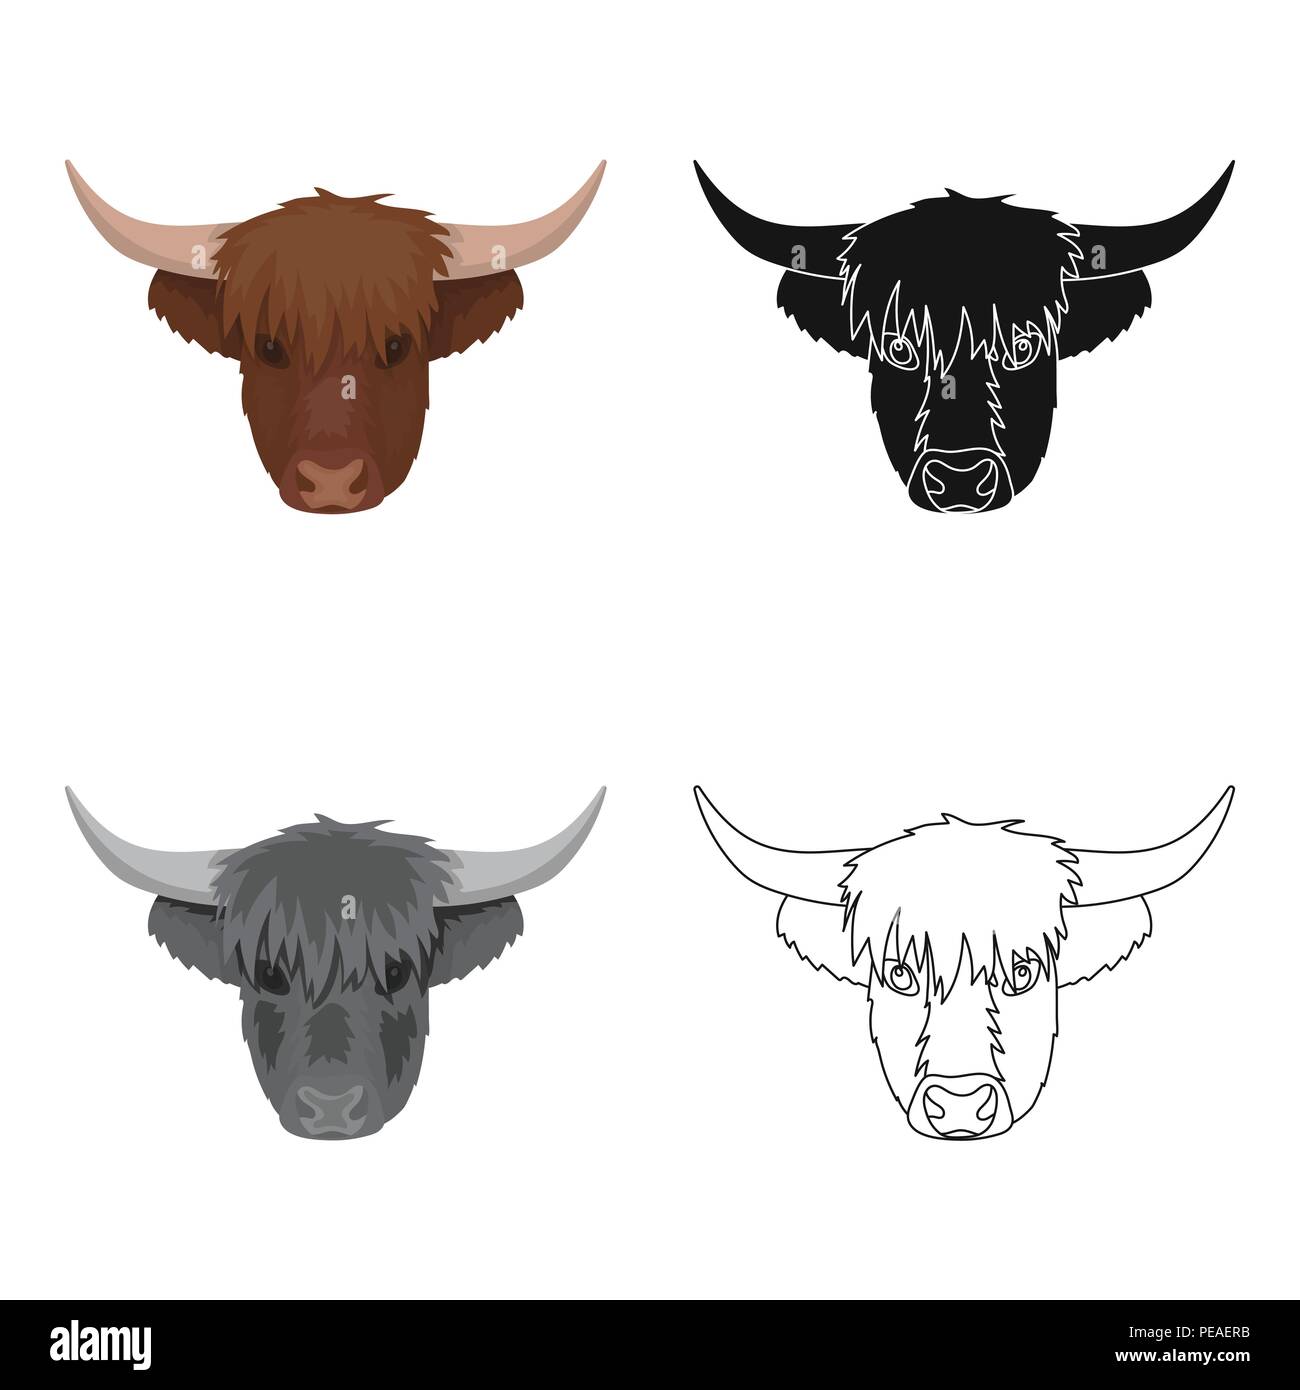 agriculture,animals ,art,beef,bizarre,bull,calf,cartoon,cattle,country,cow,culture,cute,design,domestic,farm,fun,fur, hair,hairstyle ,head,highlands,hoofed,horned,icon,illustration,isolated,livestock,logo,mammal,nature,nose,ox, pets,scotland,scottish ...